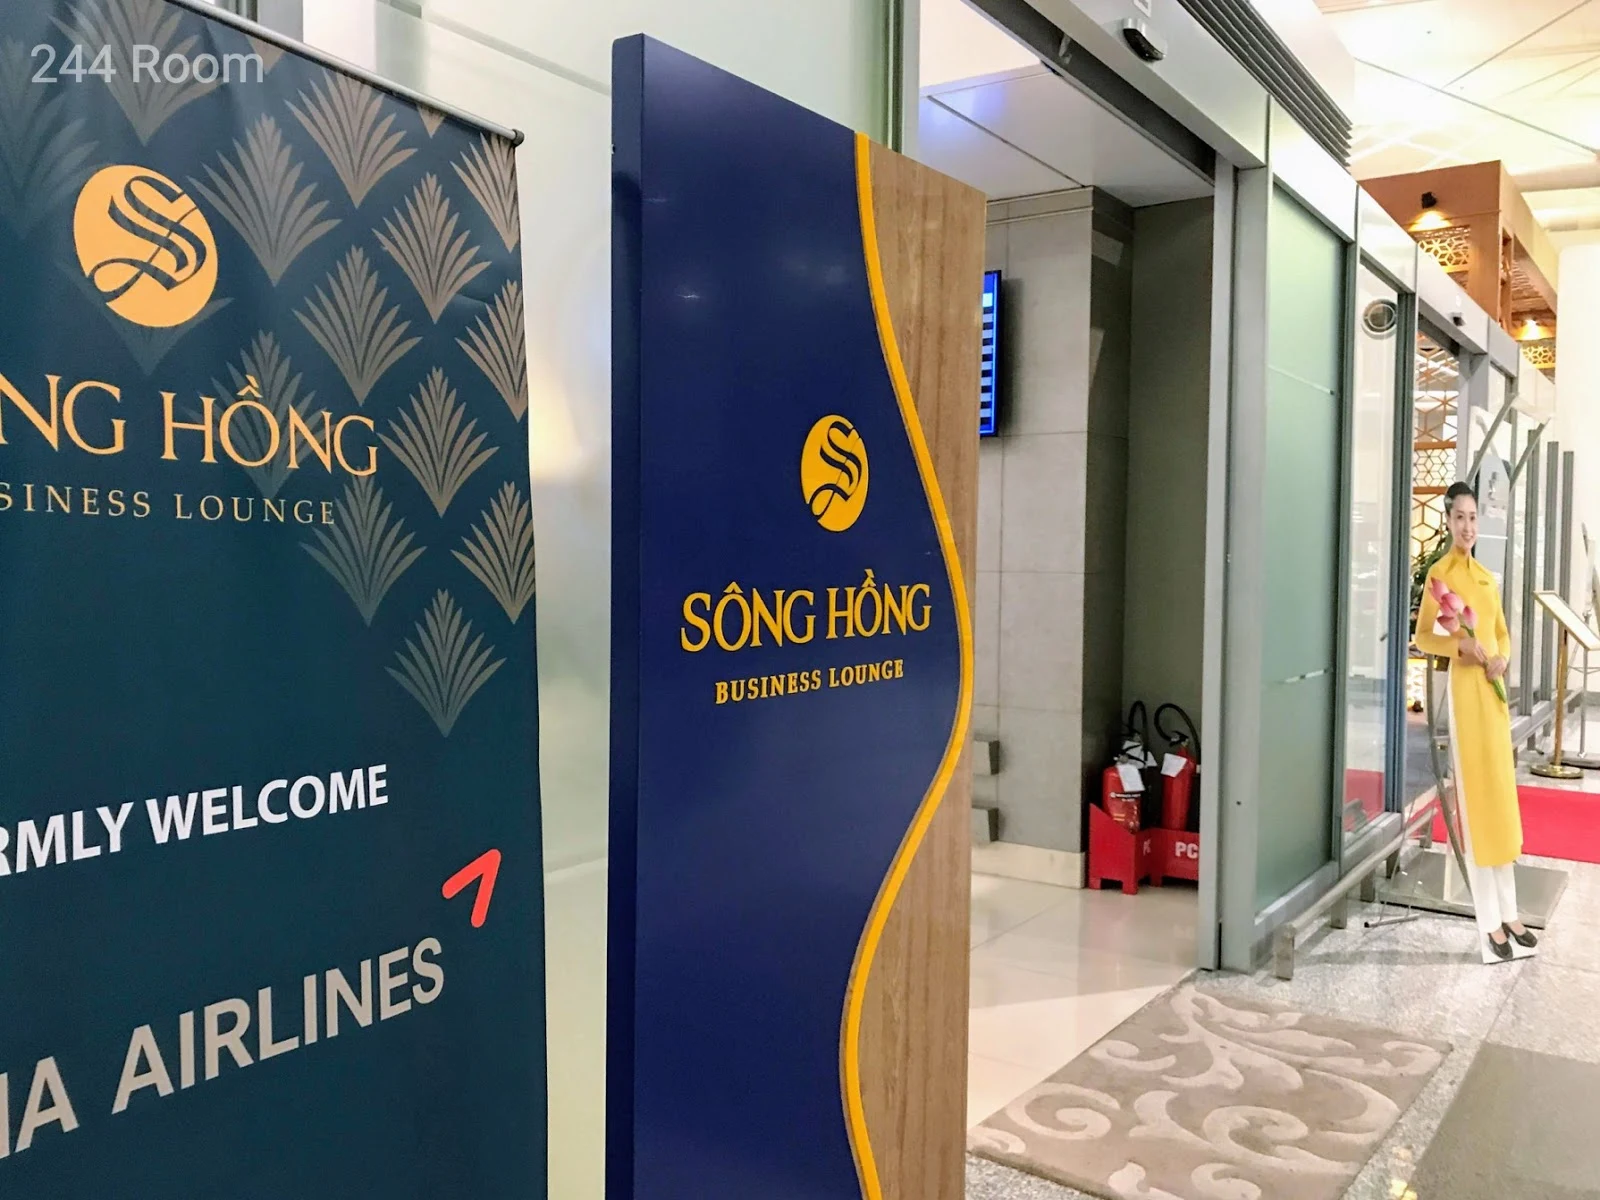 Song hong business lounge entrance